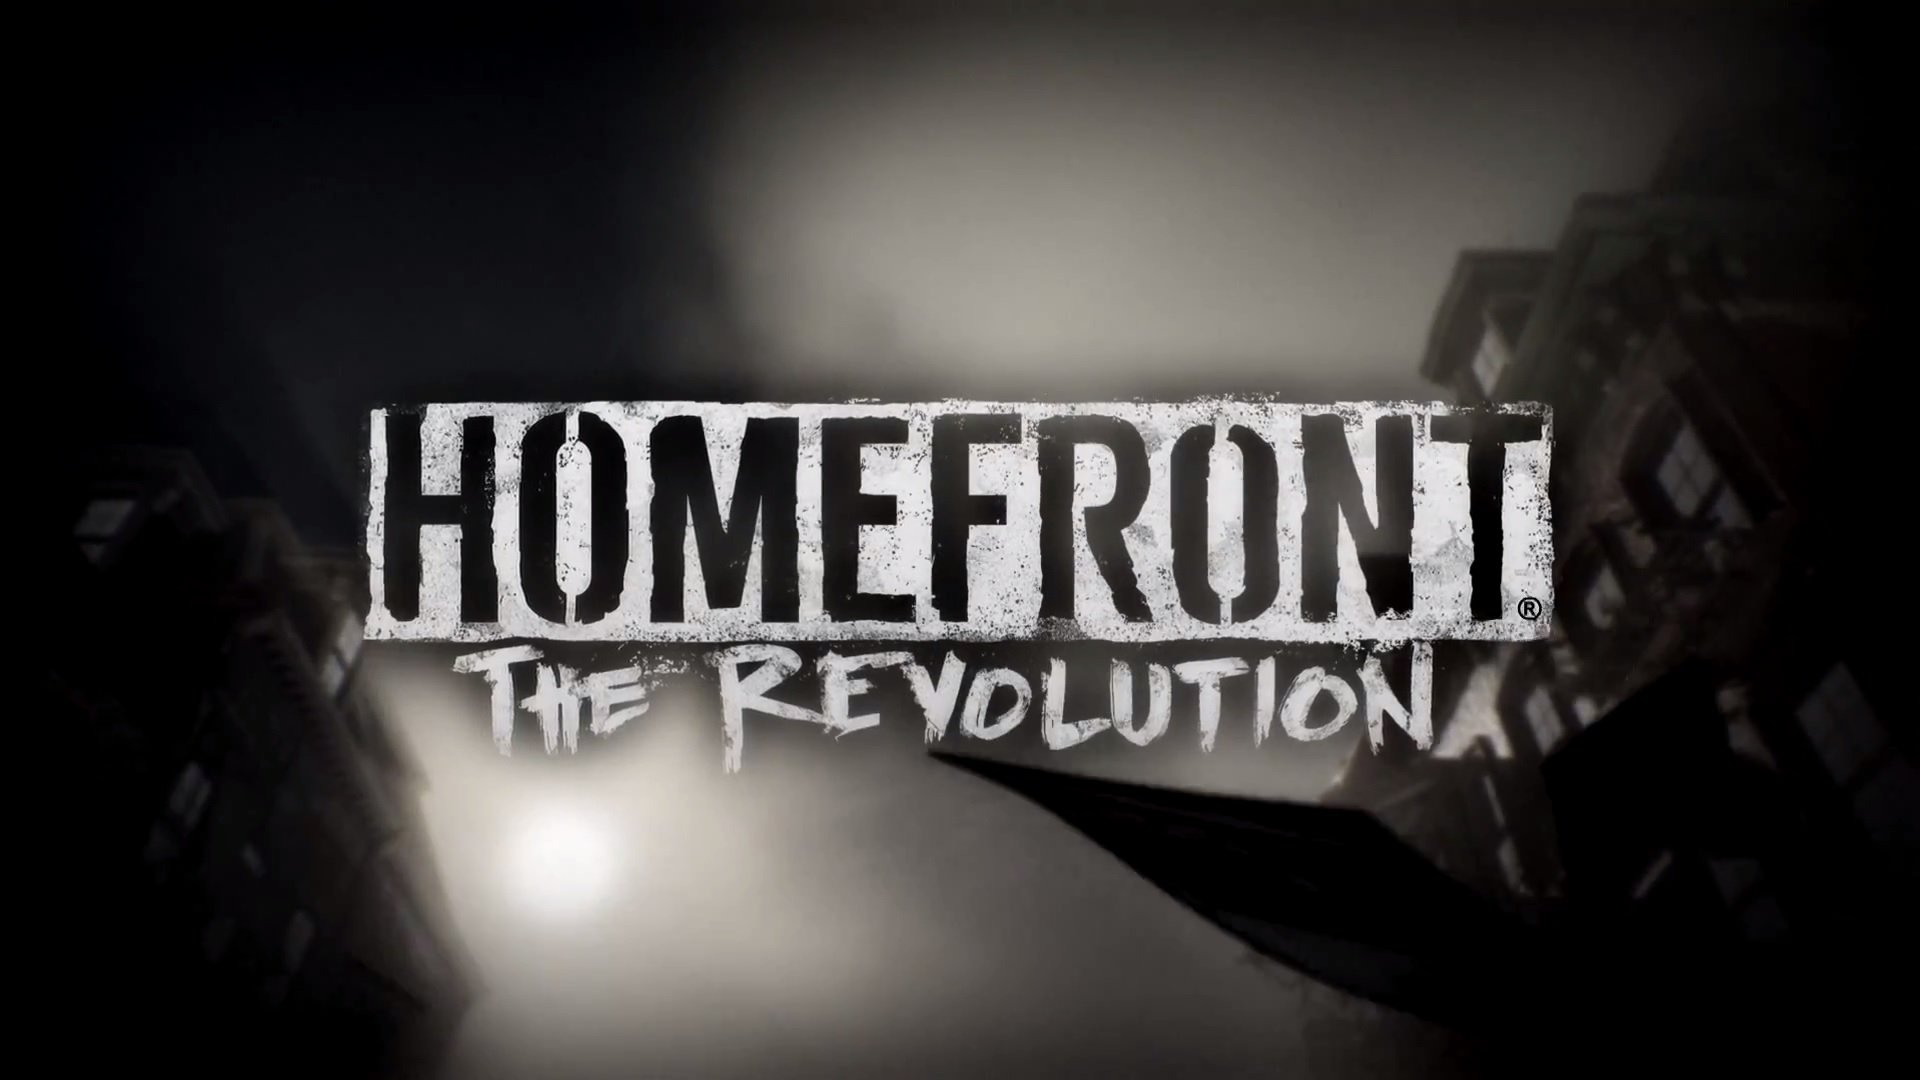 homefront, Revolution, Shooter, Apocalyptic, War, Action, Sci fi, Military, Anarchy Wallpaper